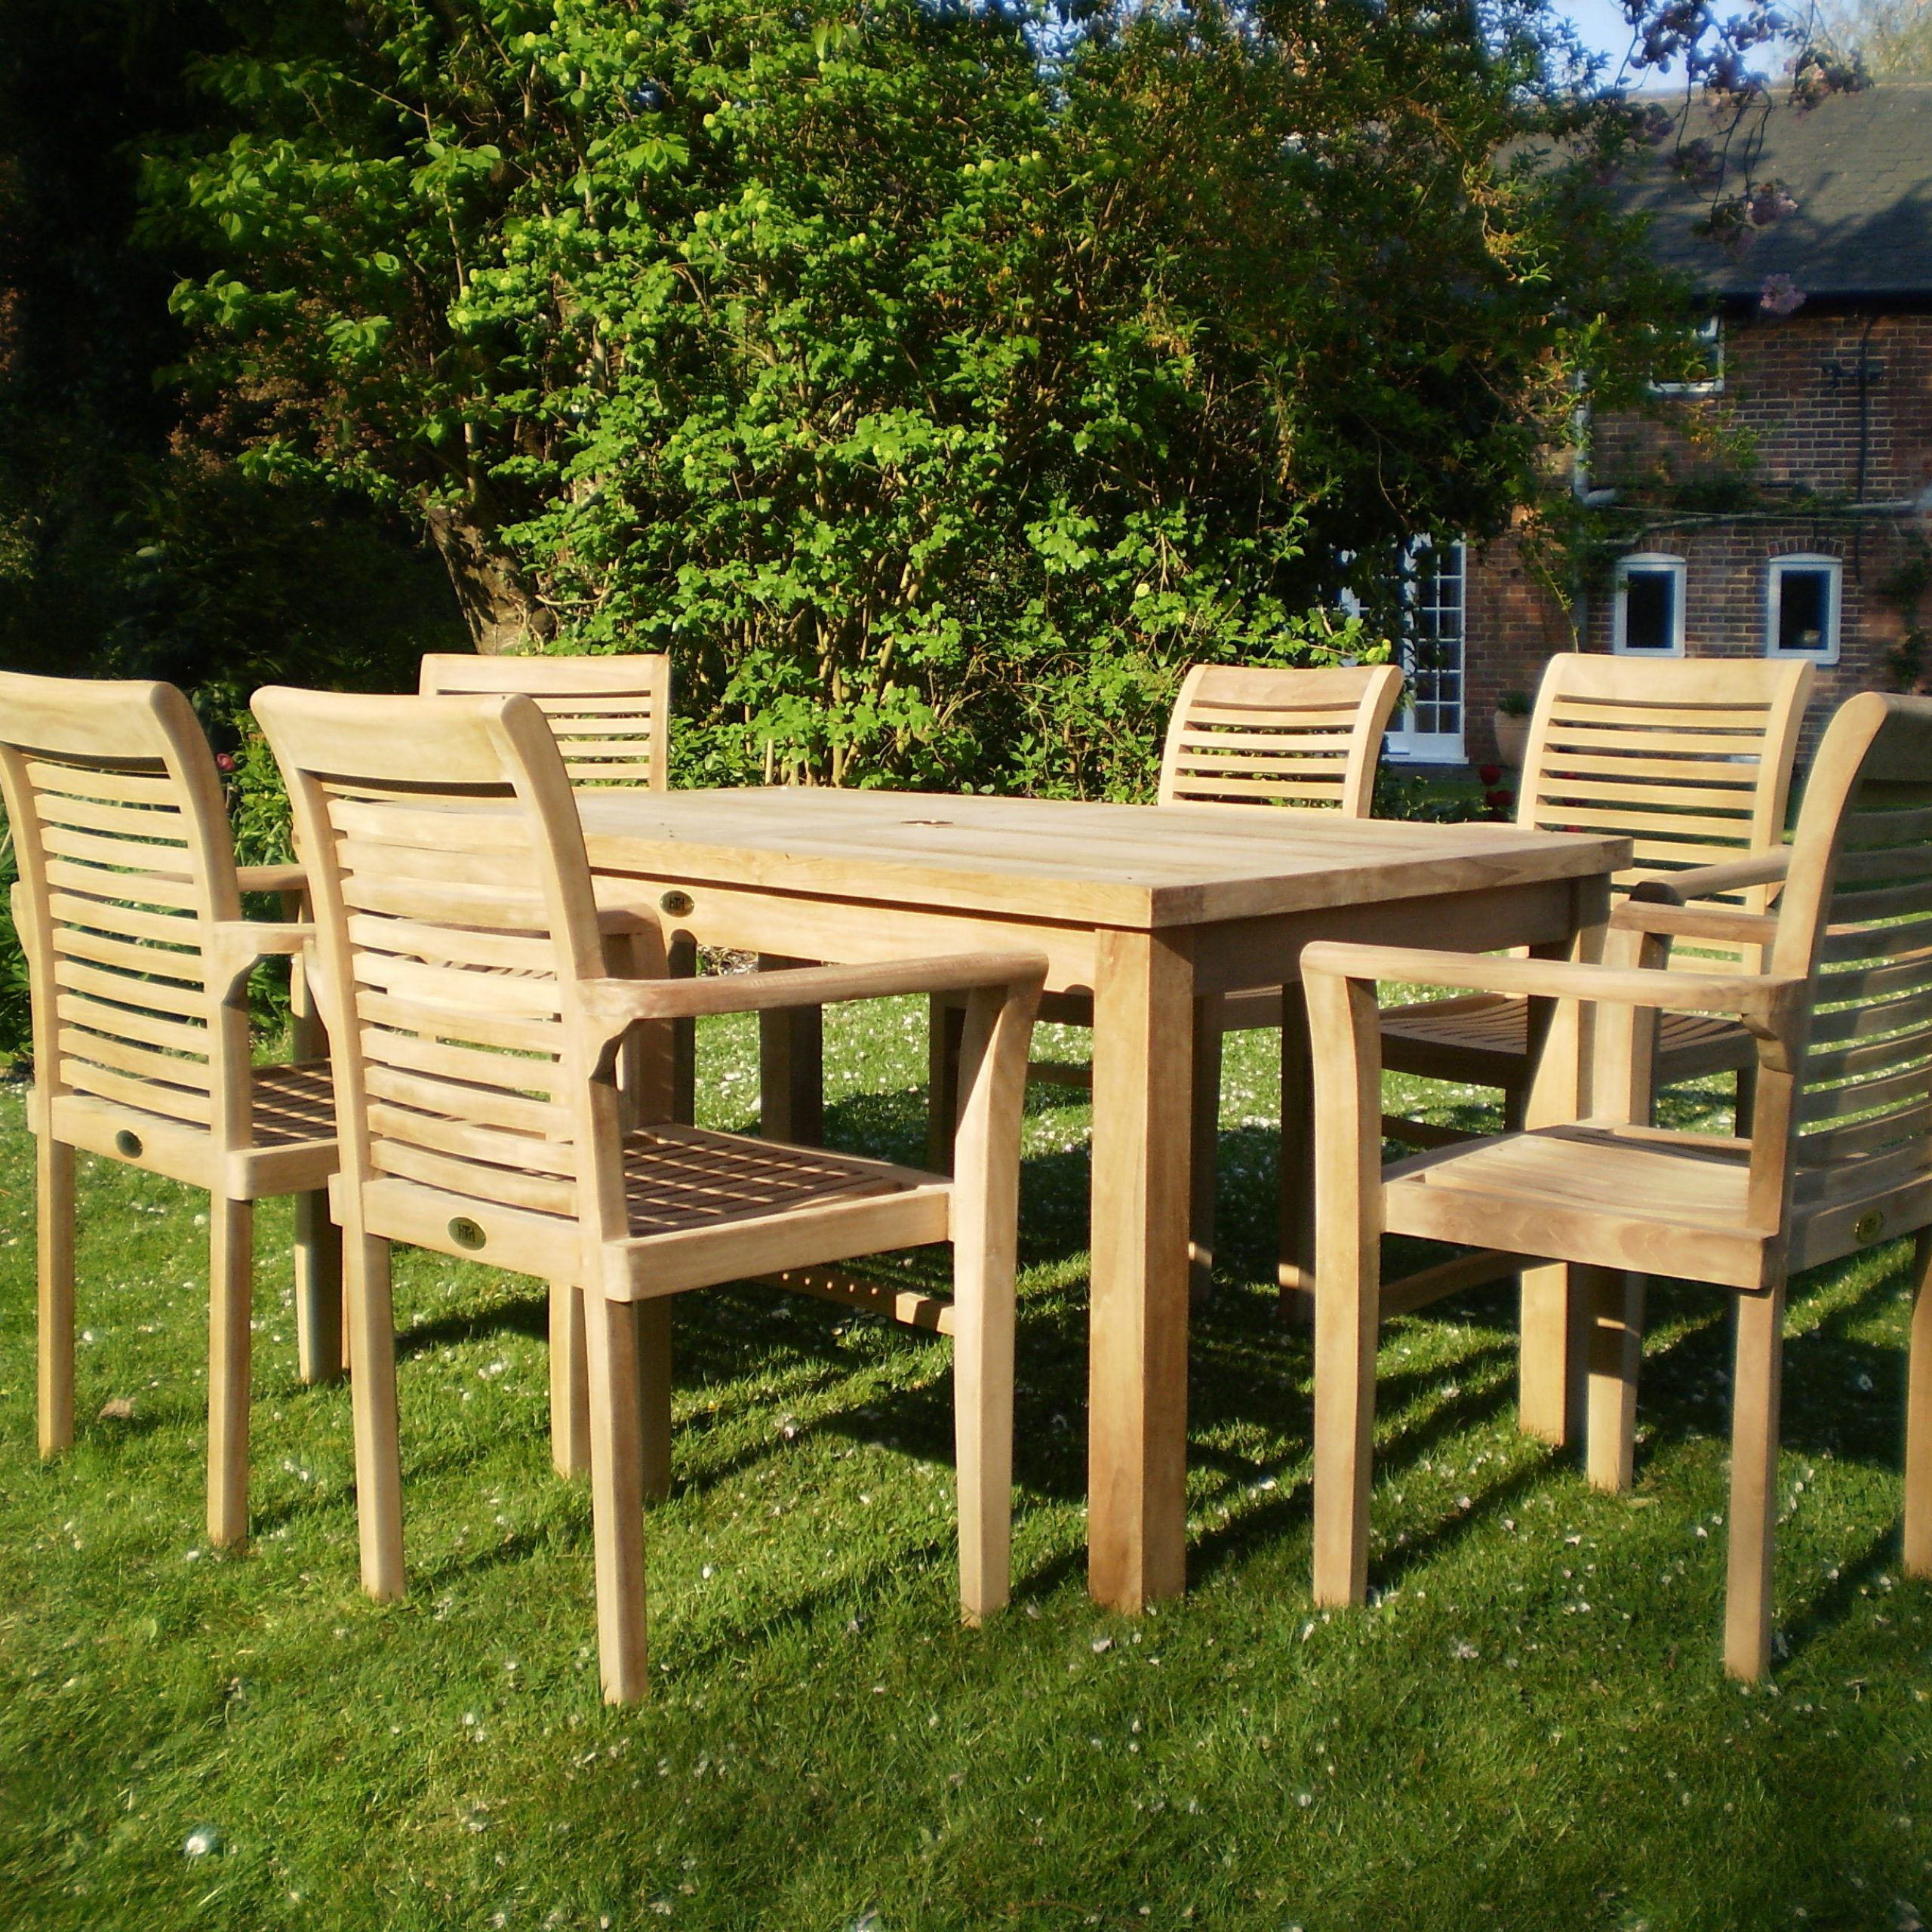 Famous Teak Patio Furniture – Chairs And Tables Uk – Teak Garden Furniture Intended For Teak Outdoor Loungers Sets (View 6 of 15)